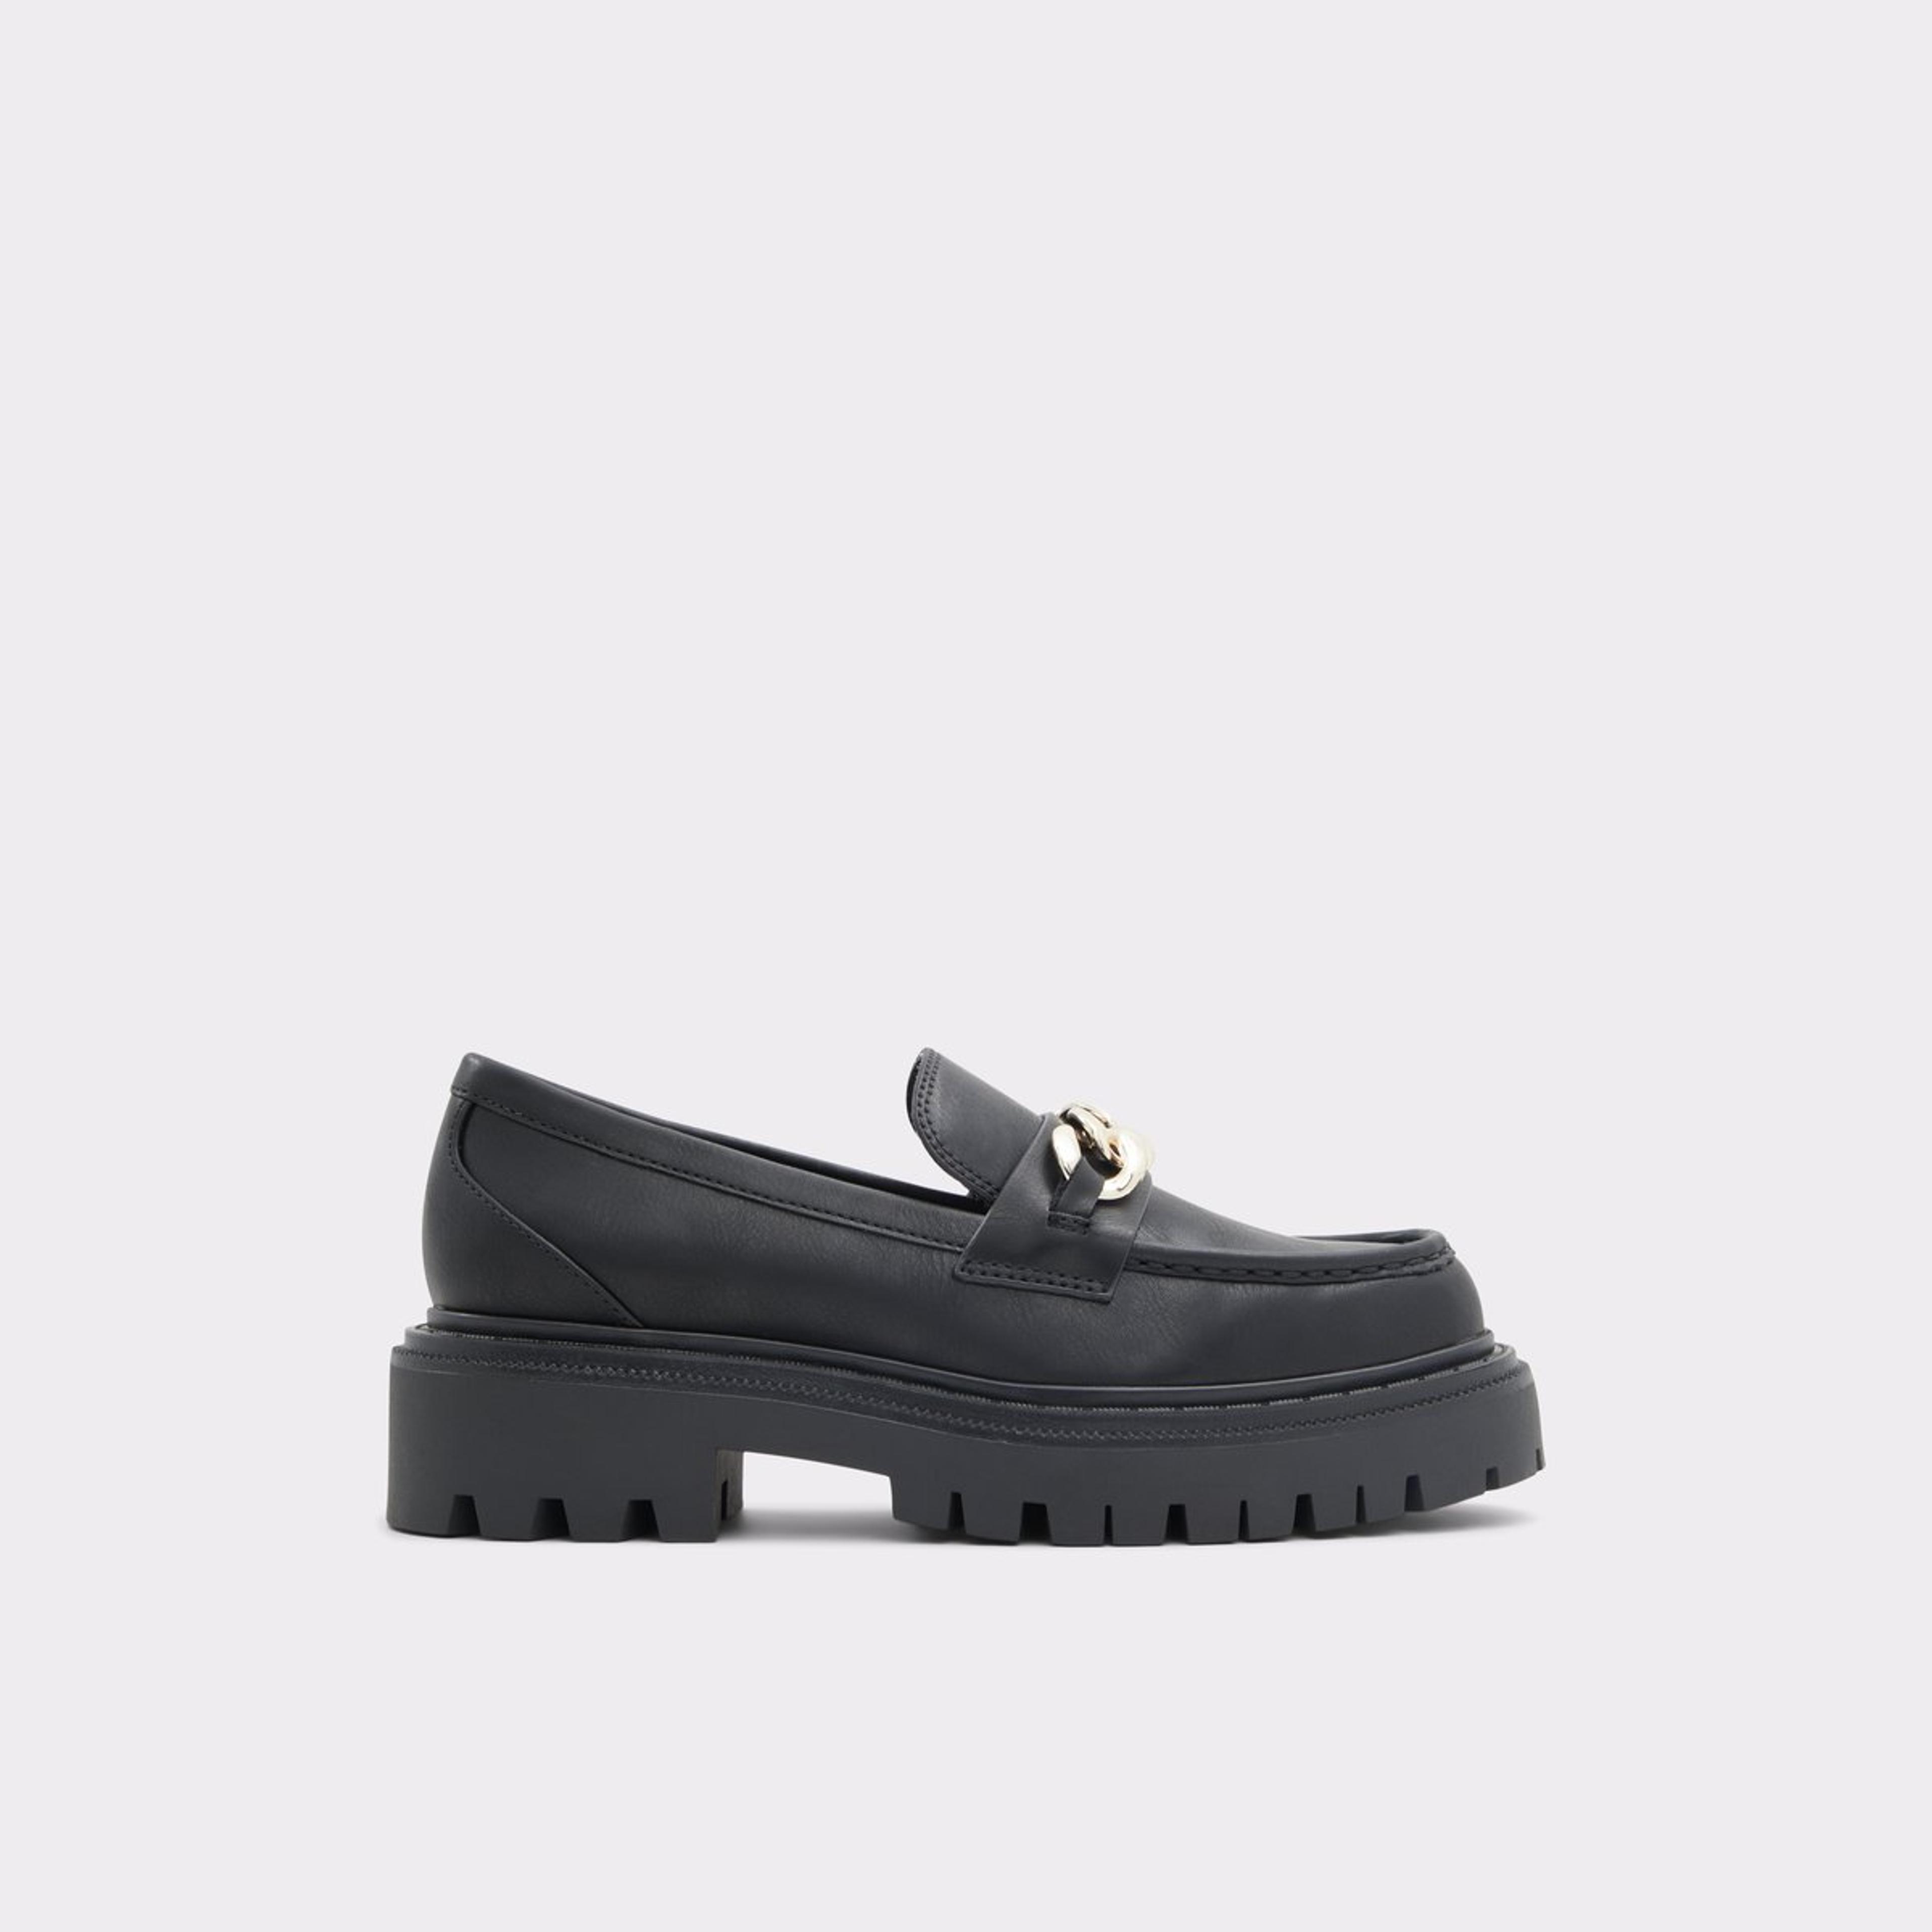 Brixton Black Synthetic Smooth Women's Loafers | ALDO US